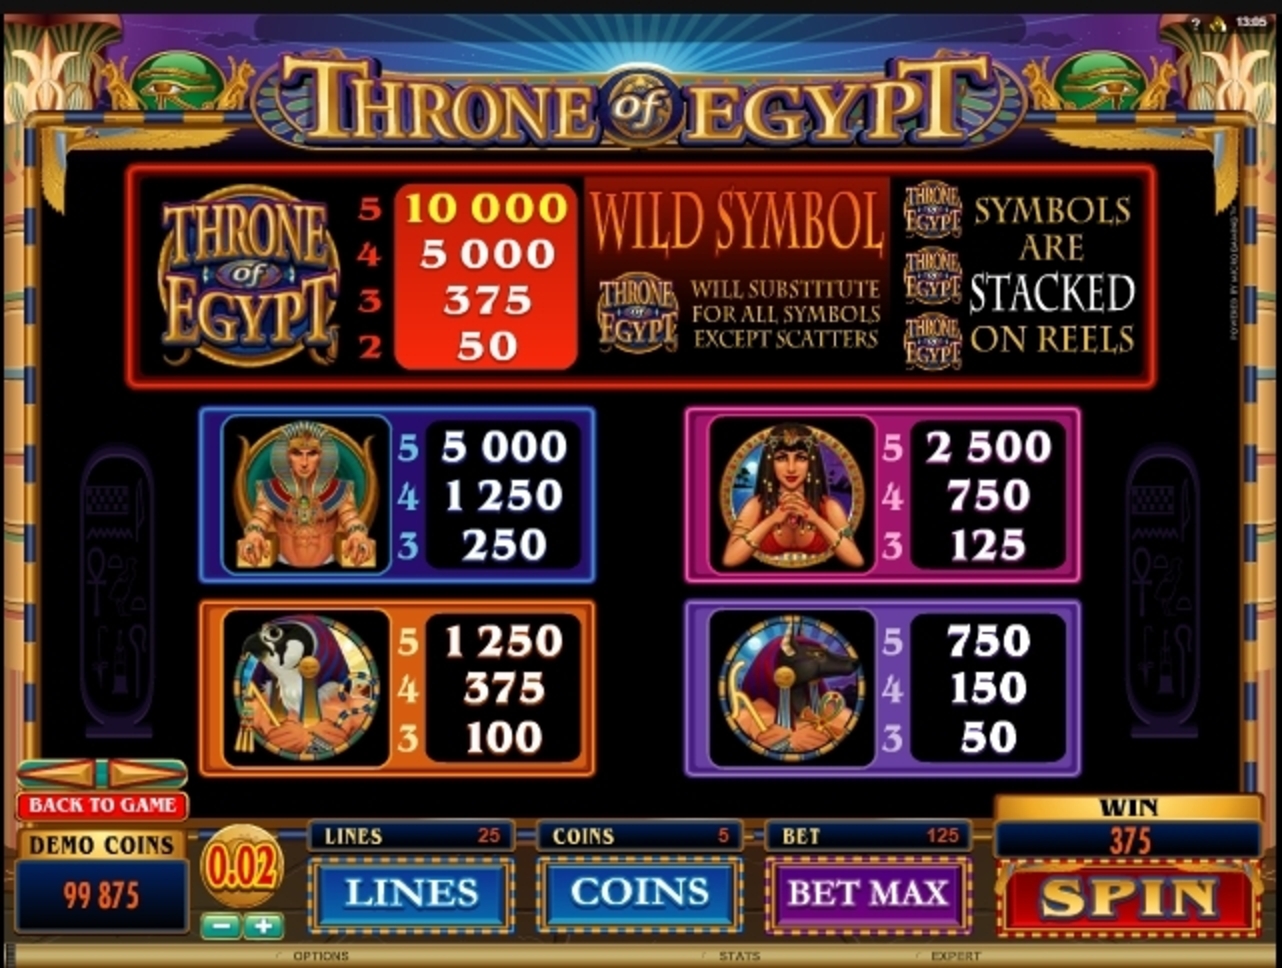 The throne of Egypt slot